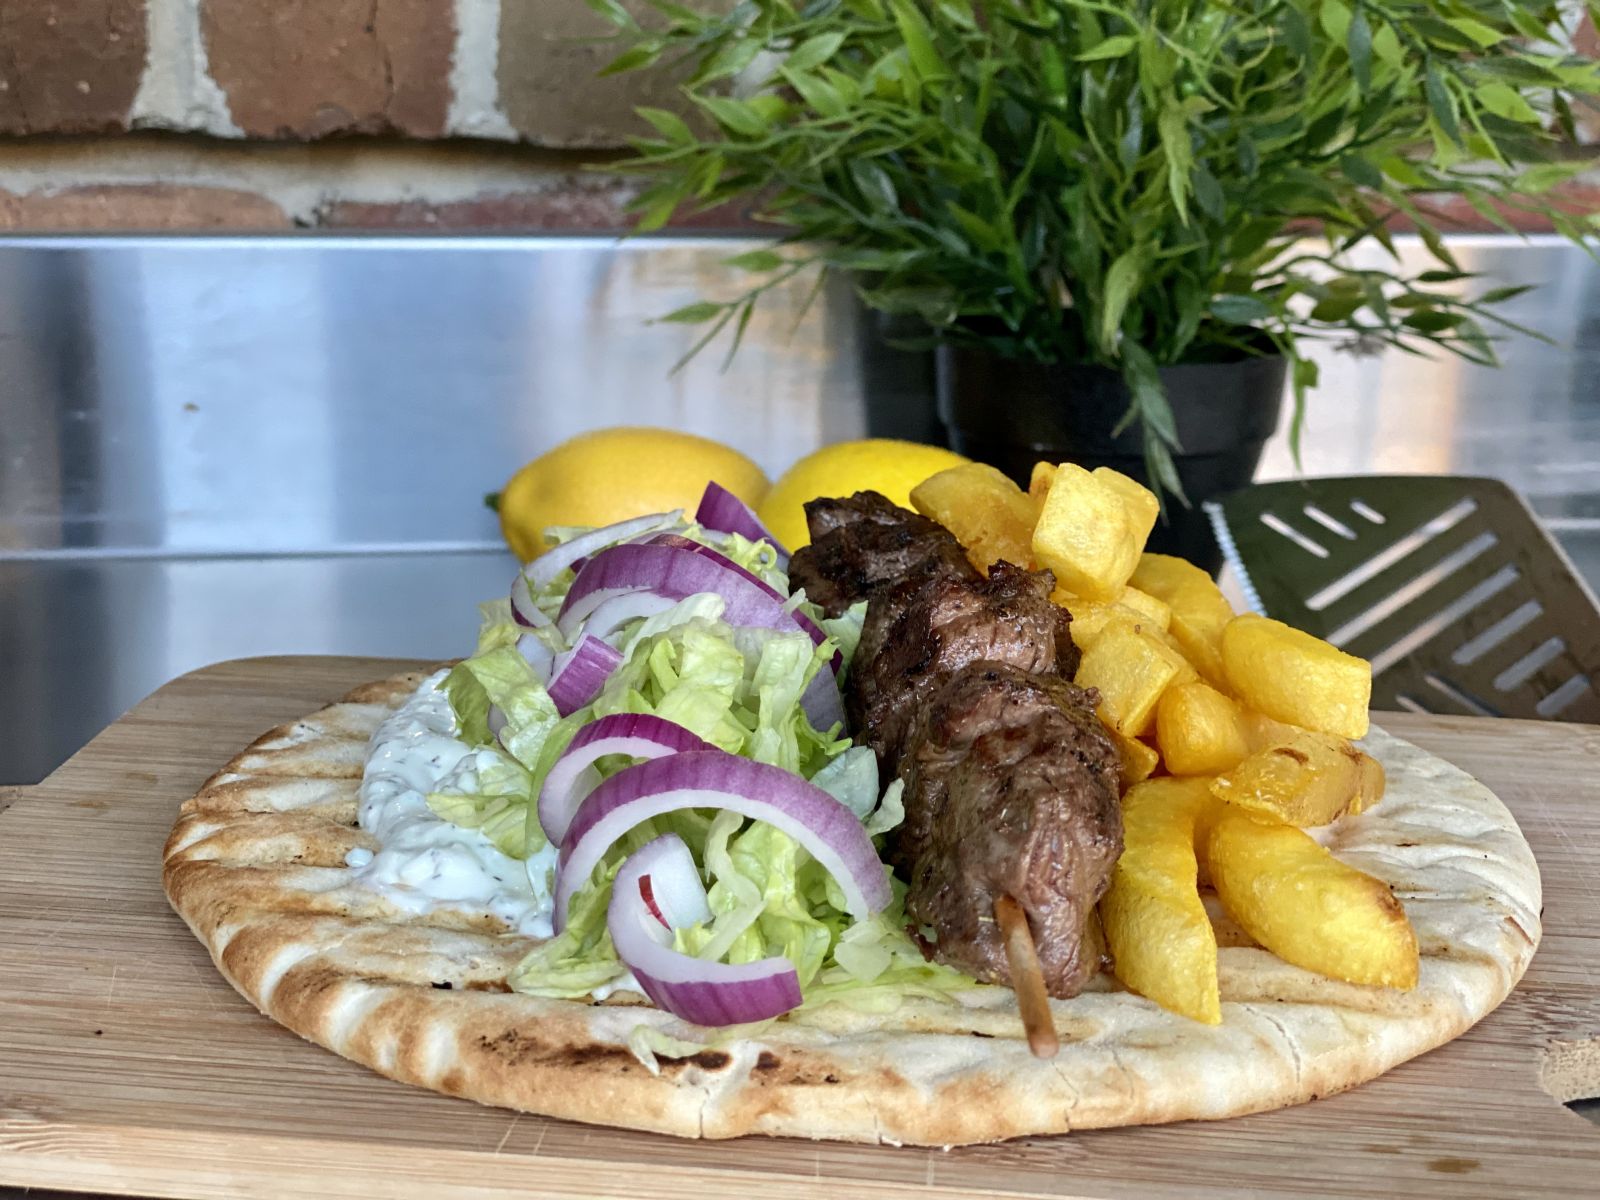 Beef skewers with salad and pita bread